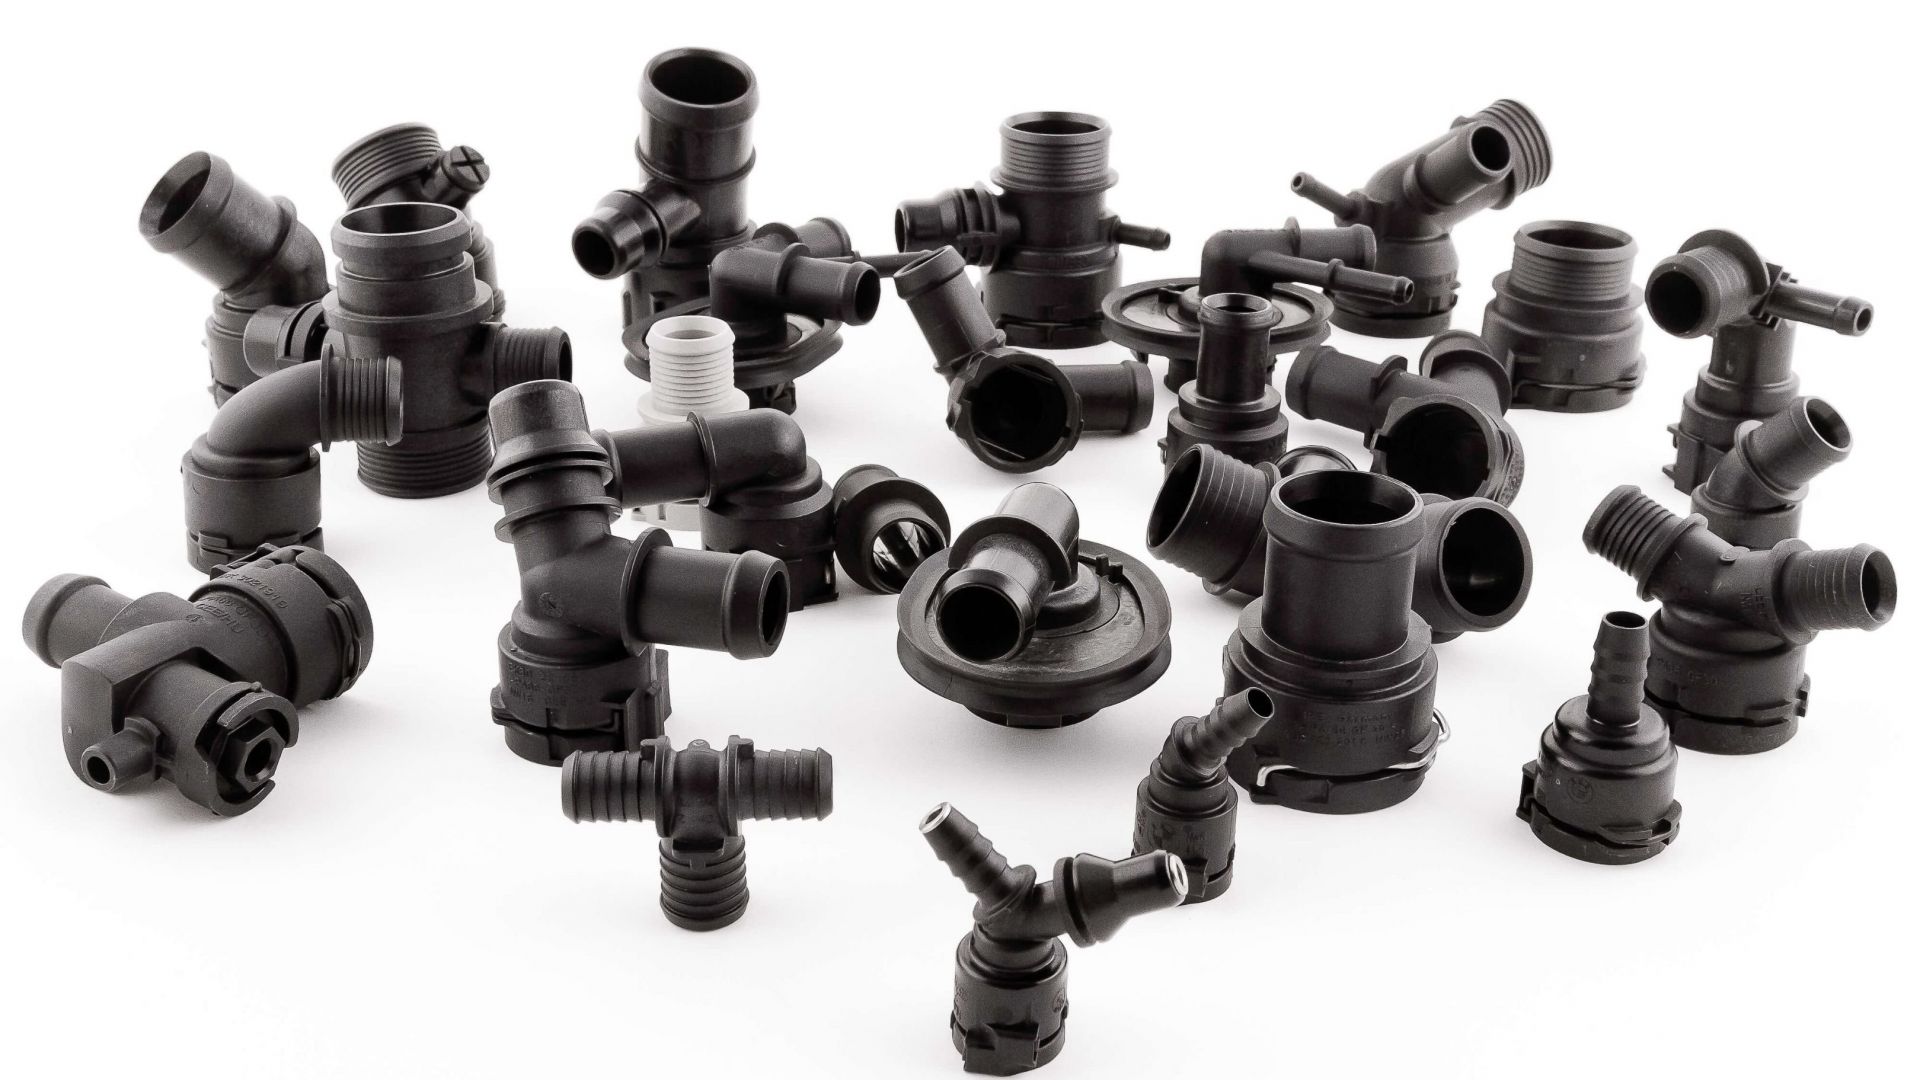 FLUID QUICK CONNECTORS AND FITTINGS